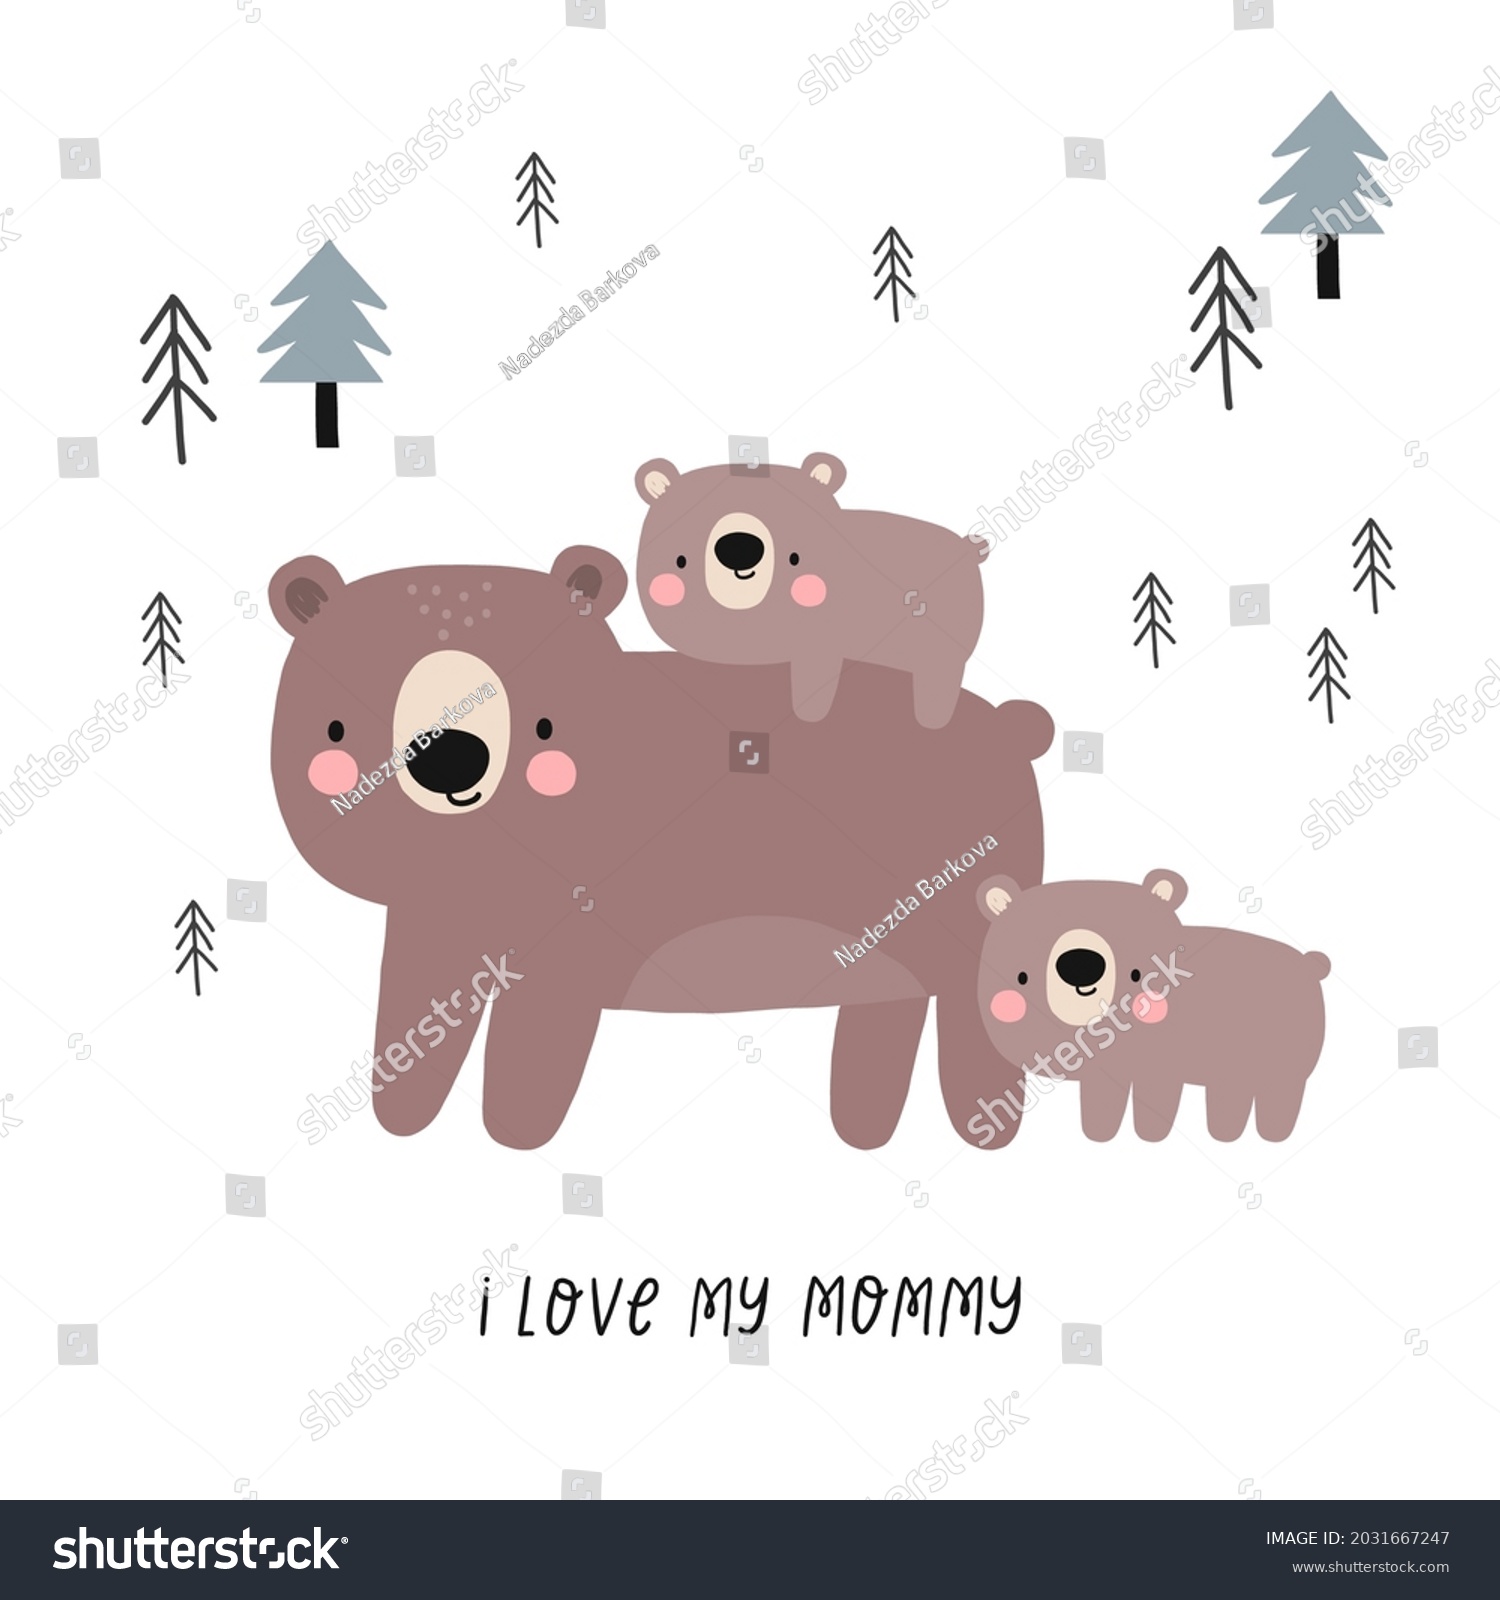 SVG of Vector card with cute Bear. Flat style print for kids. Mom and baby cute cartoon Bear character. Mother's Day card. Hand drawn lettering - i love my mommy svg